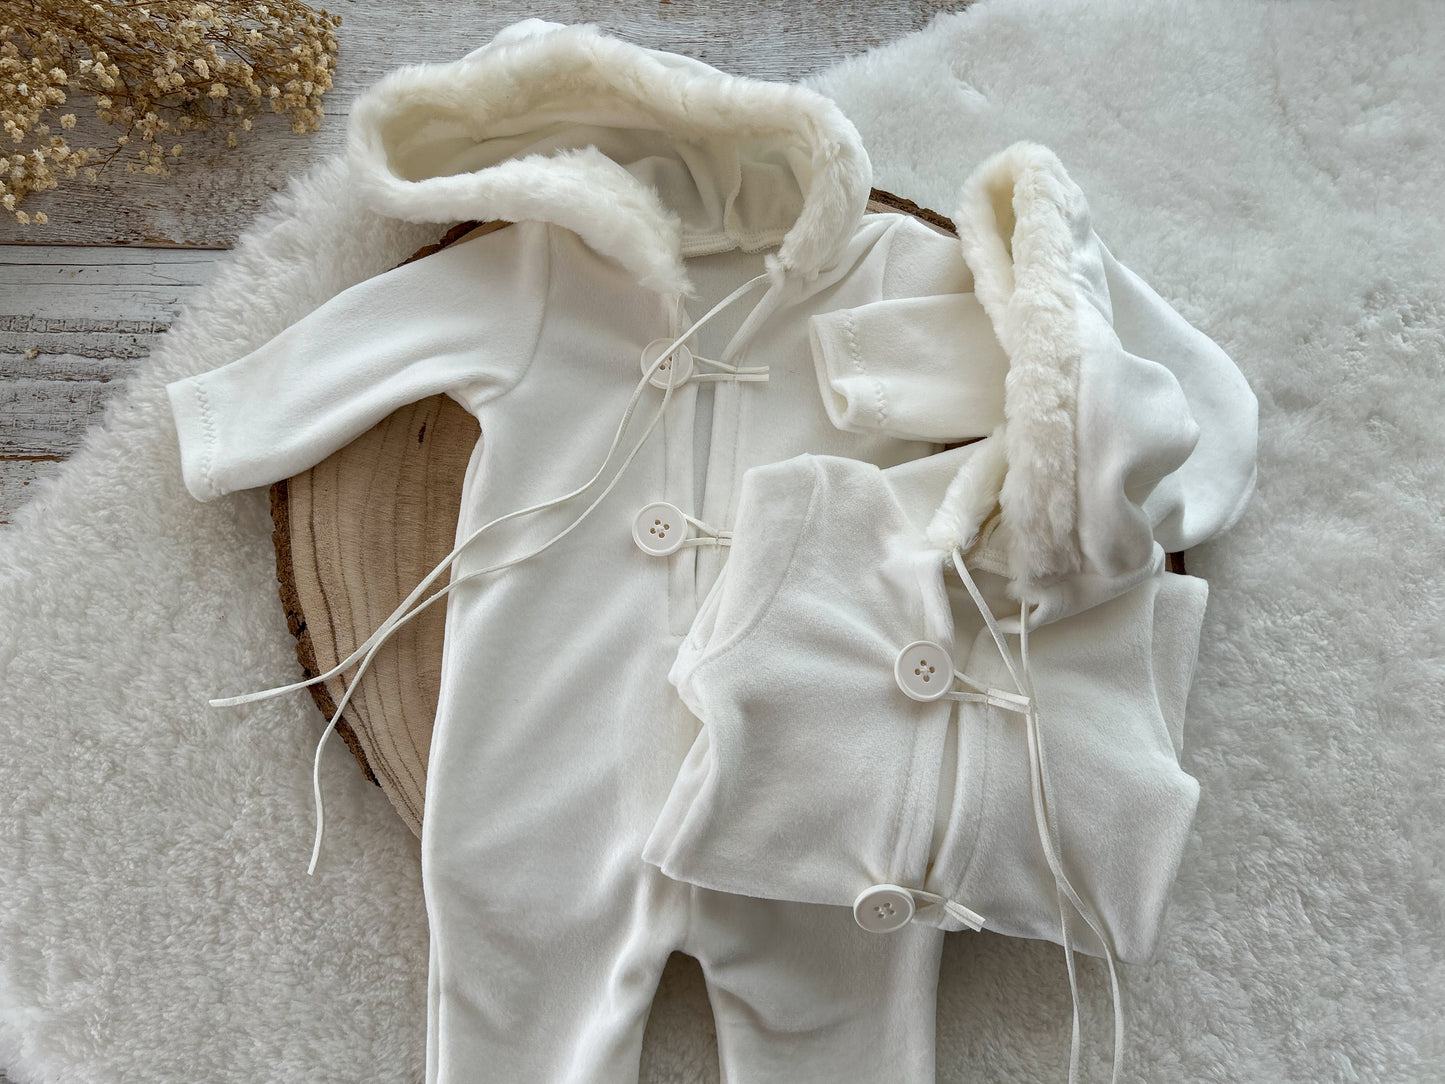 Newborn Photo Prop Outfit Baby Boy Romper Newborn Romper White Hooded Outfit Photography Prop